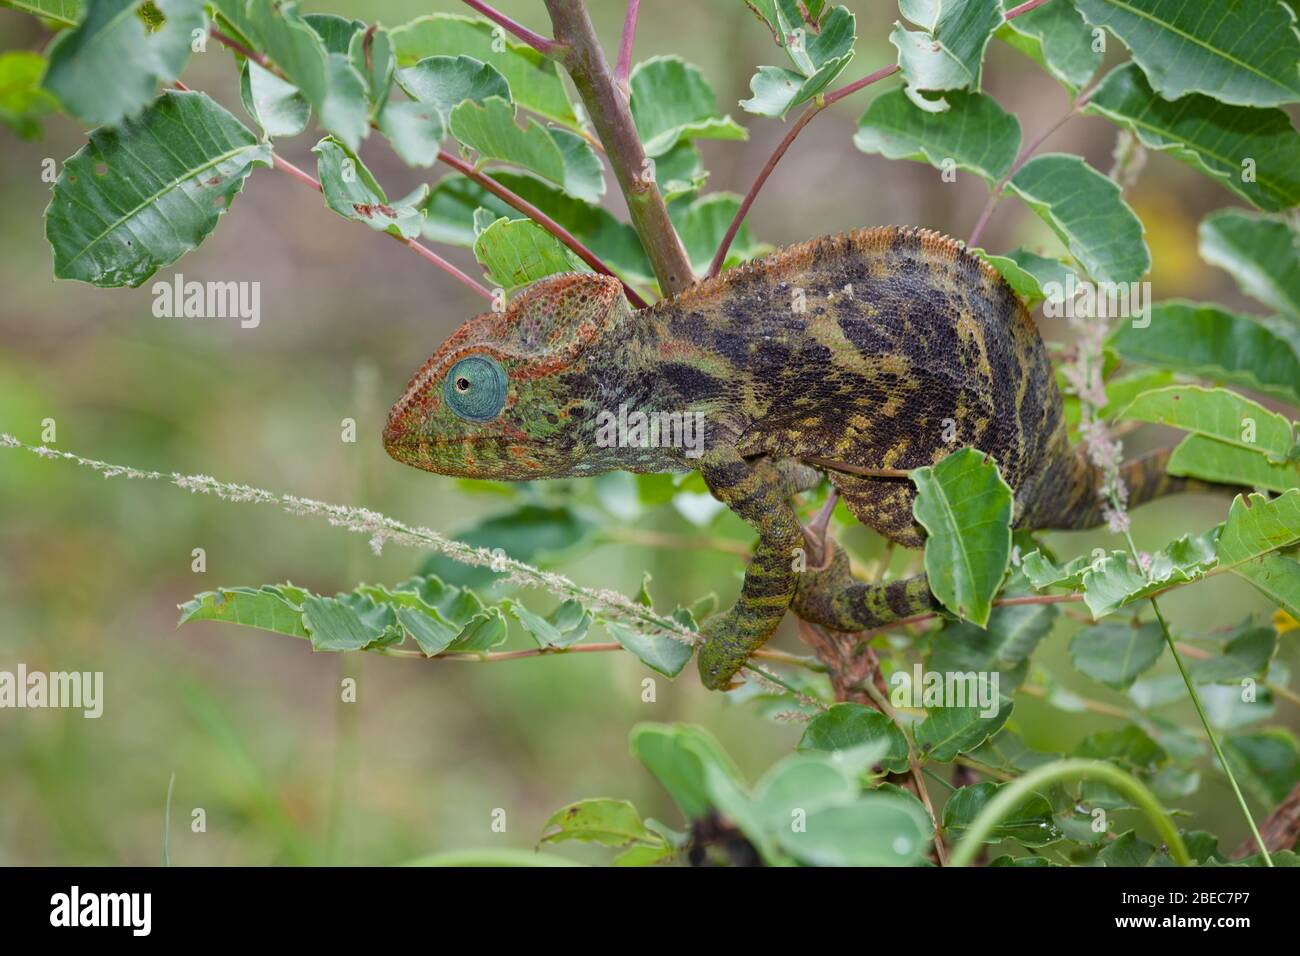 Close-up of a chameleon on a tree Stock Photo